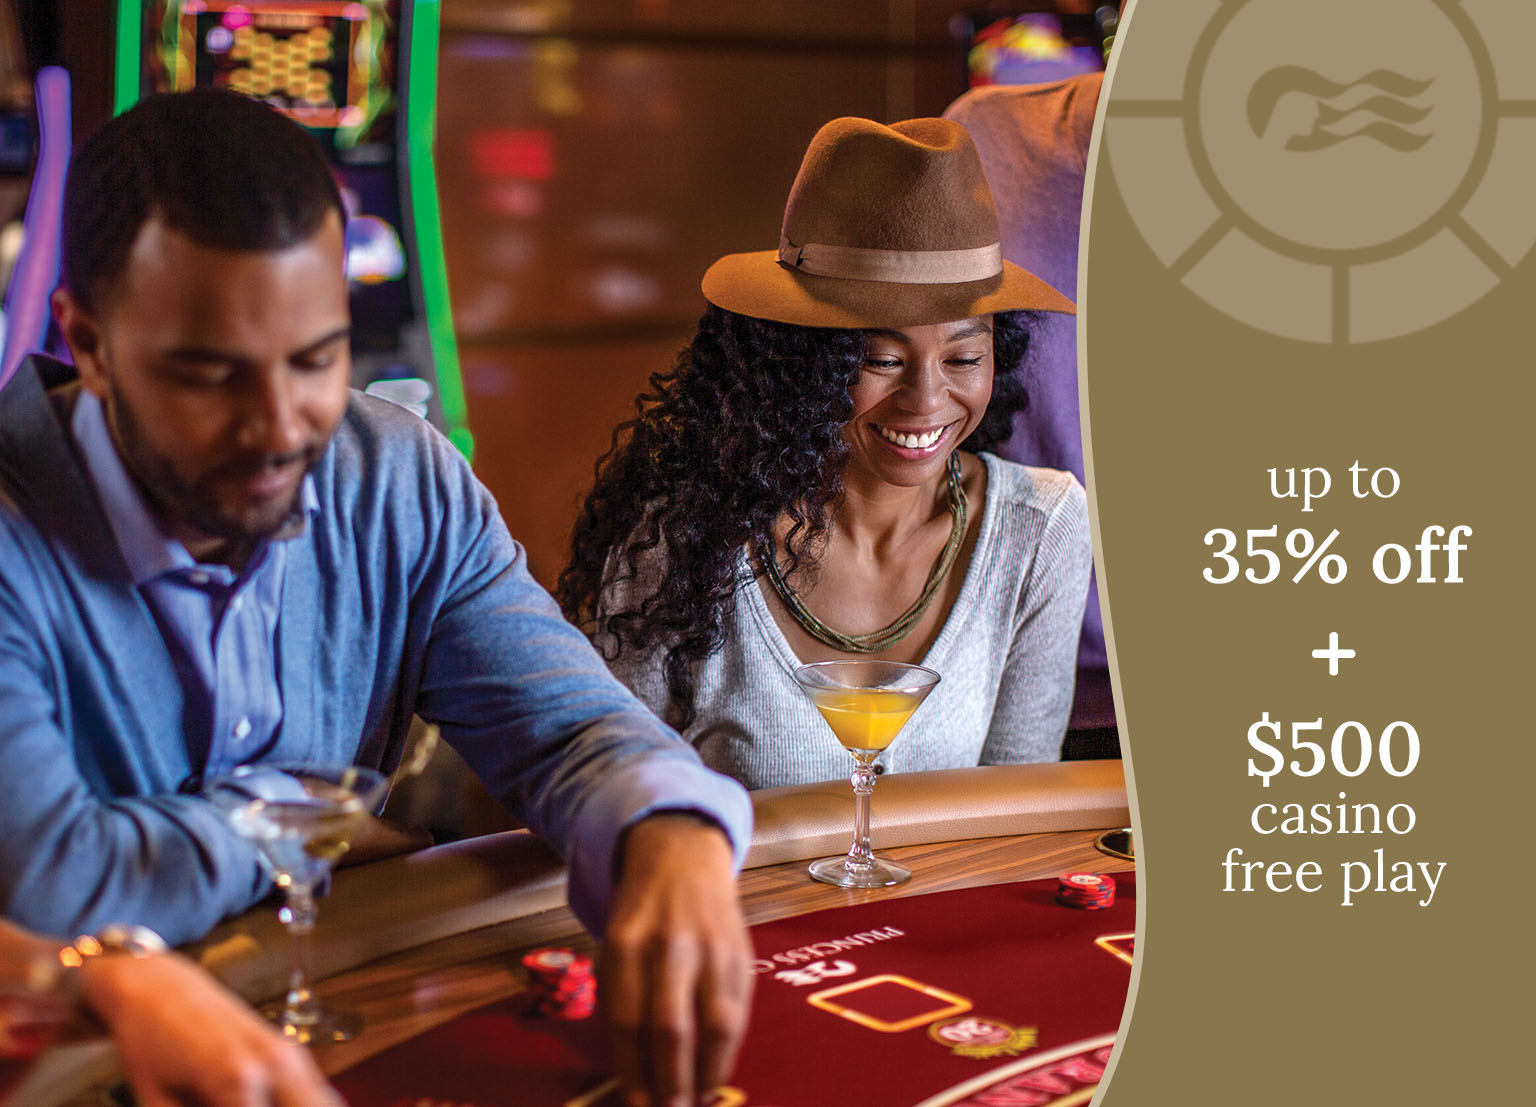 Up to 35% off + $500 casino free play!